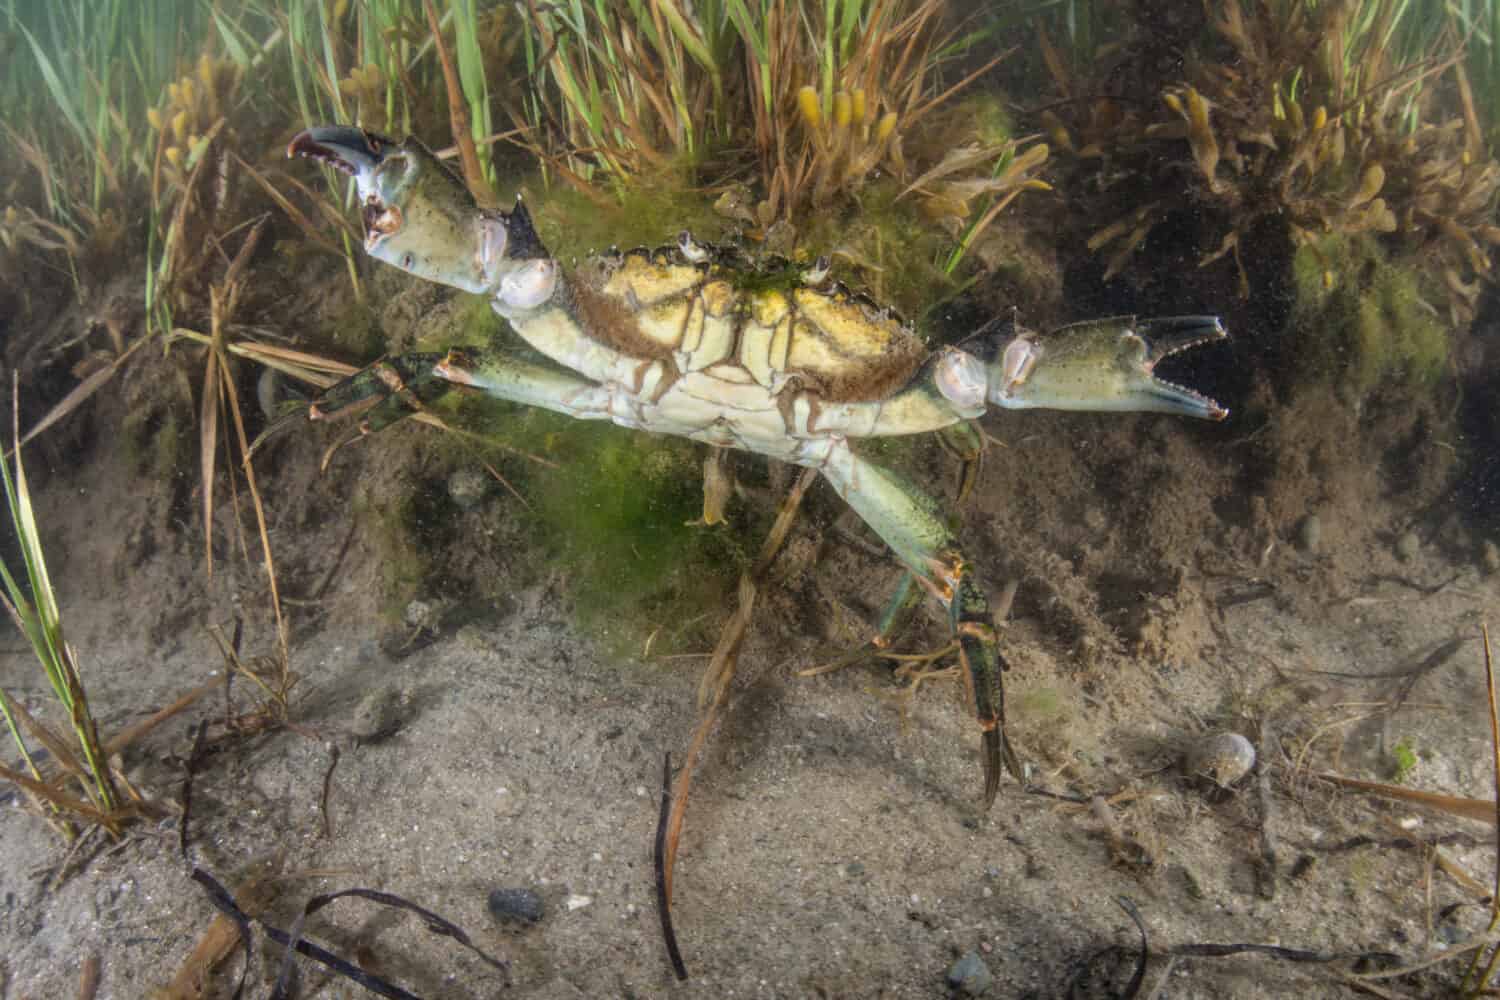 A purple marsh crab (Sesarma reticulatum) crawls in a marsh on Cape Cod, Massachusetts. This species feeds on cordgrass and burrows into the marsh sediments.